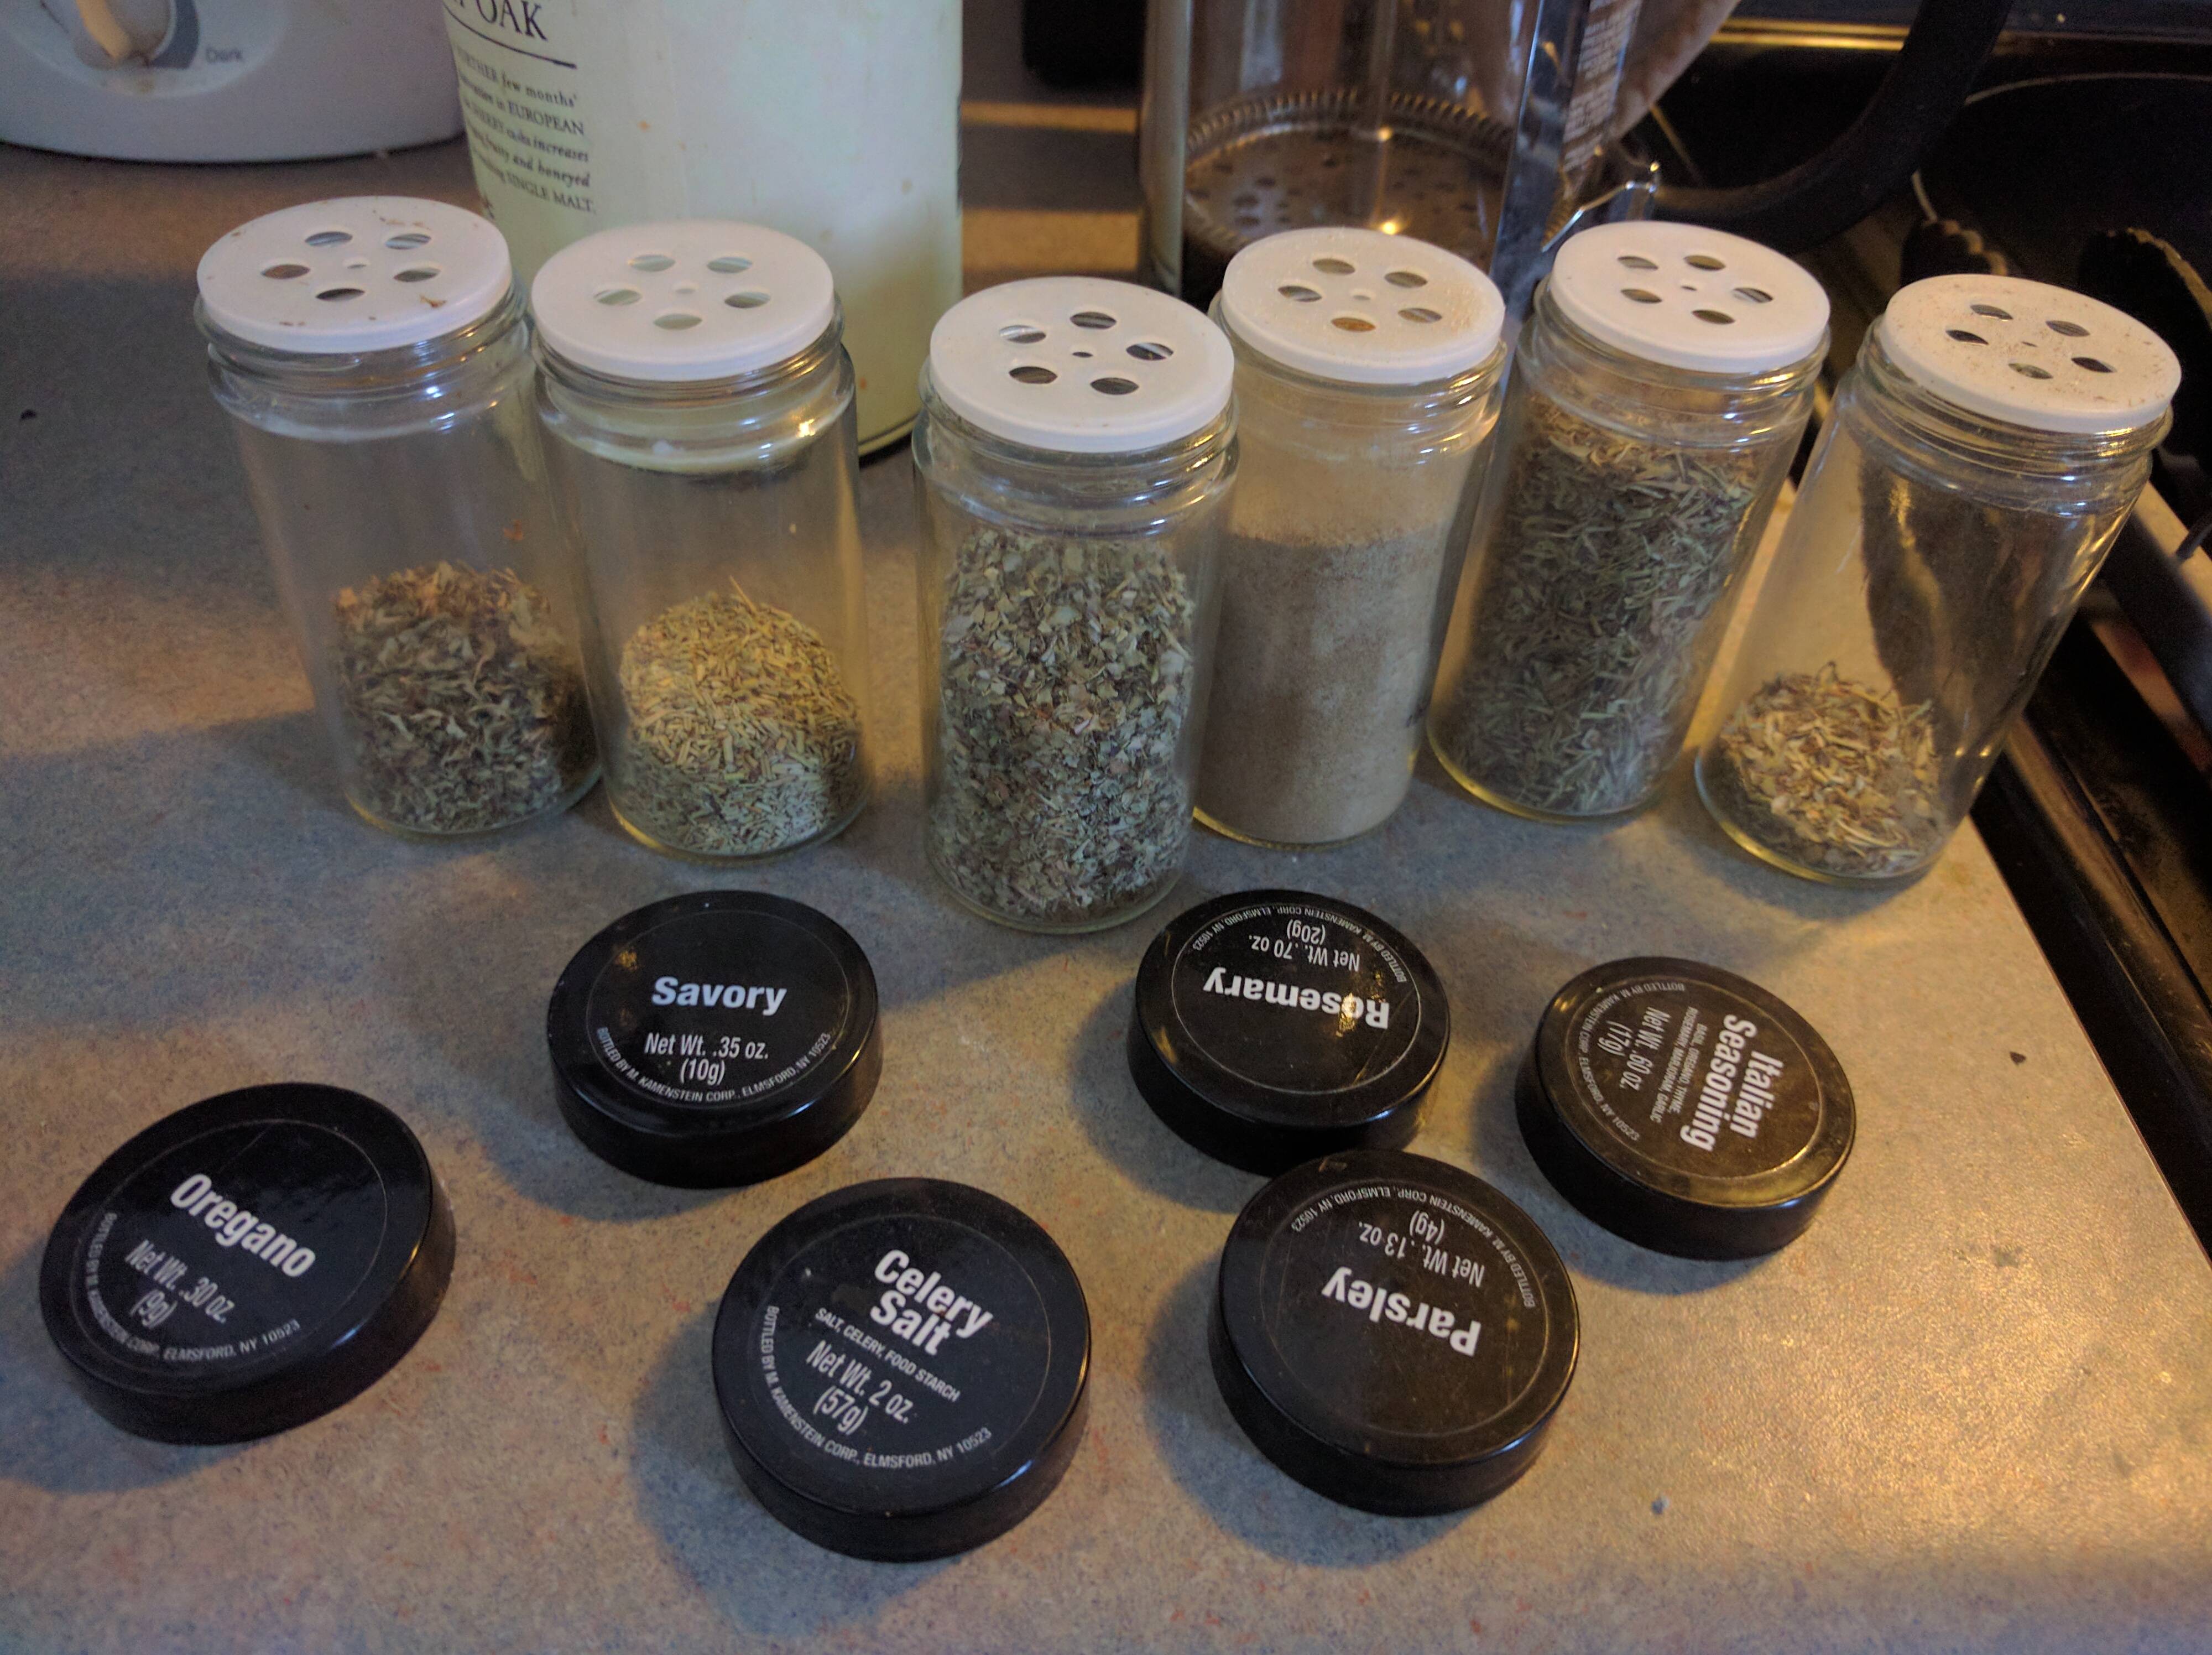 Pro tip – When cooking, don’t remove all the spice lids at the same time.